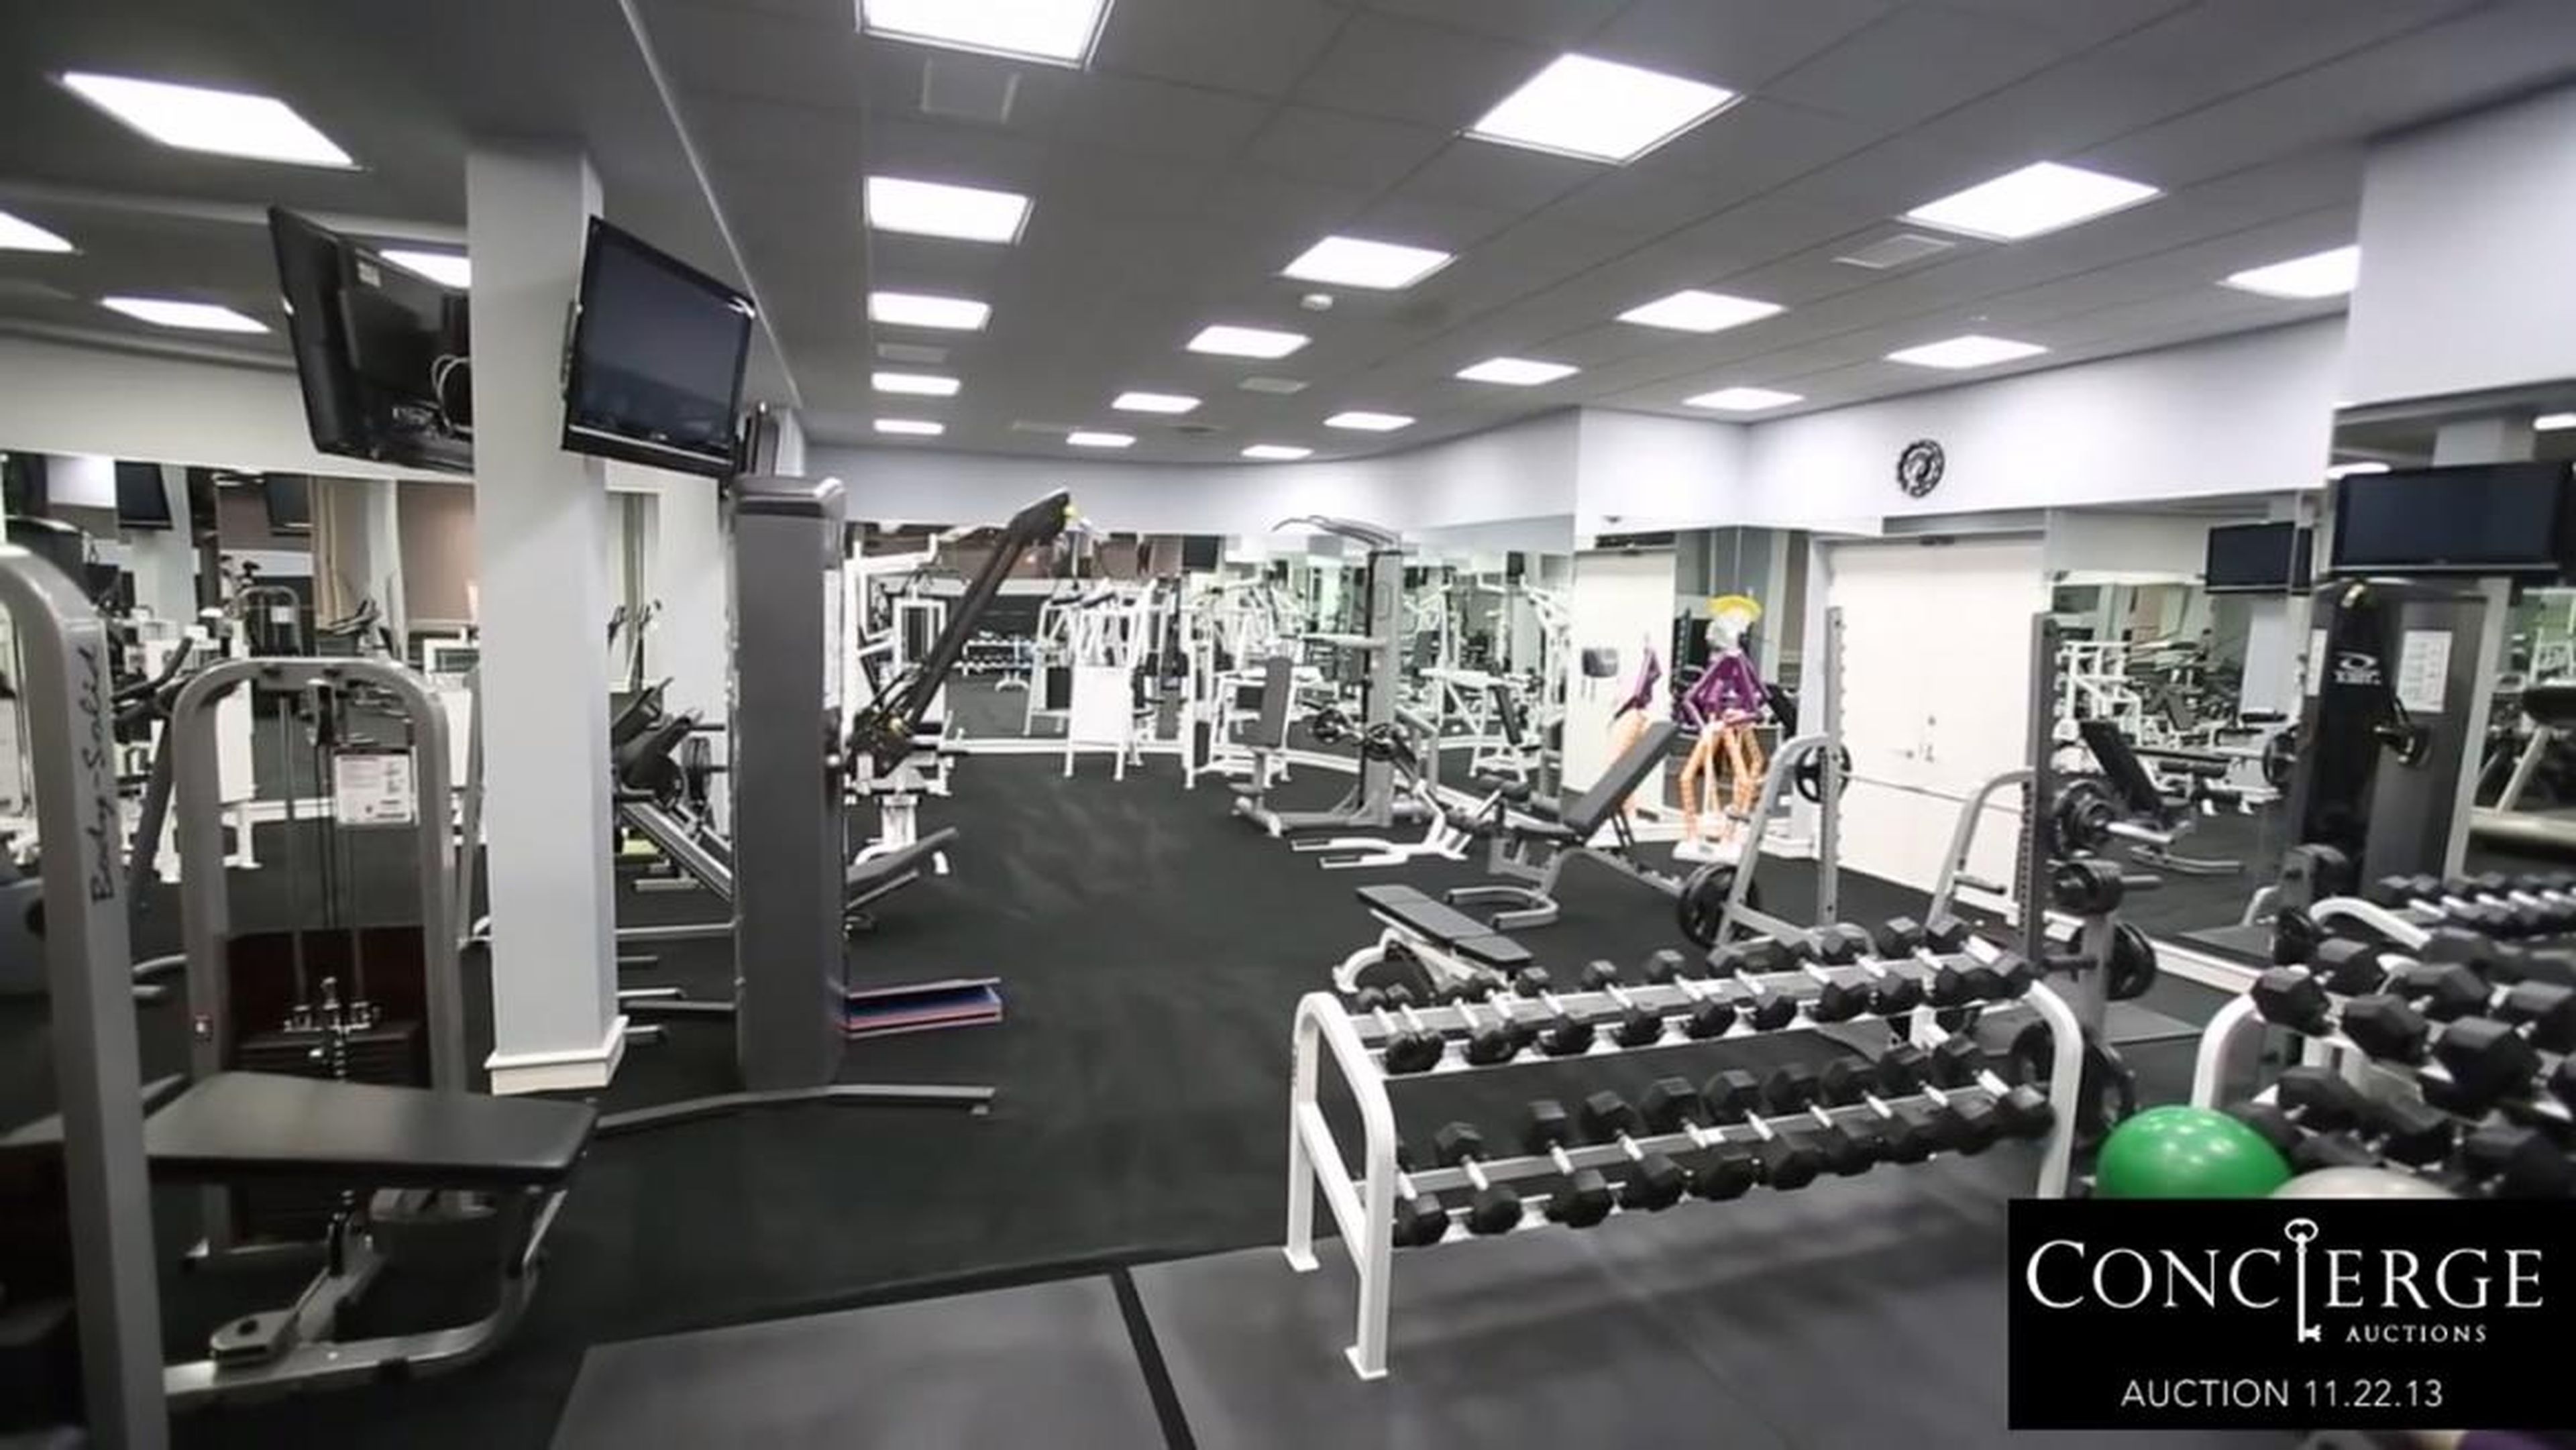 The home also features a full gym.